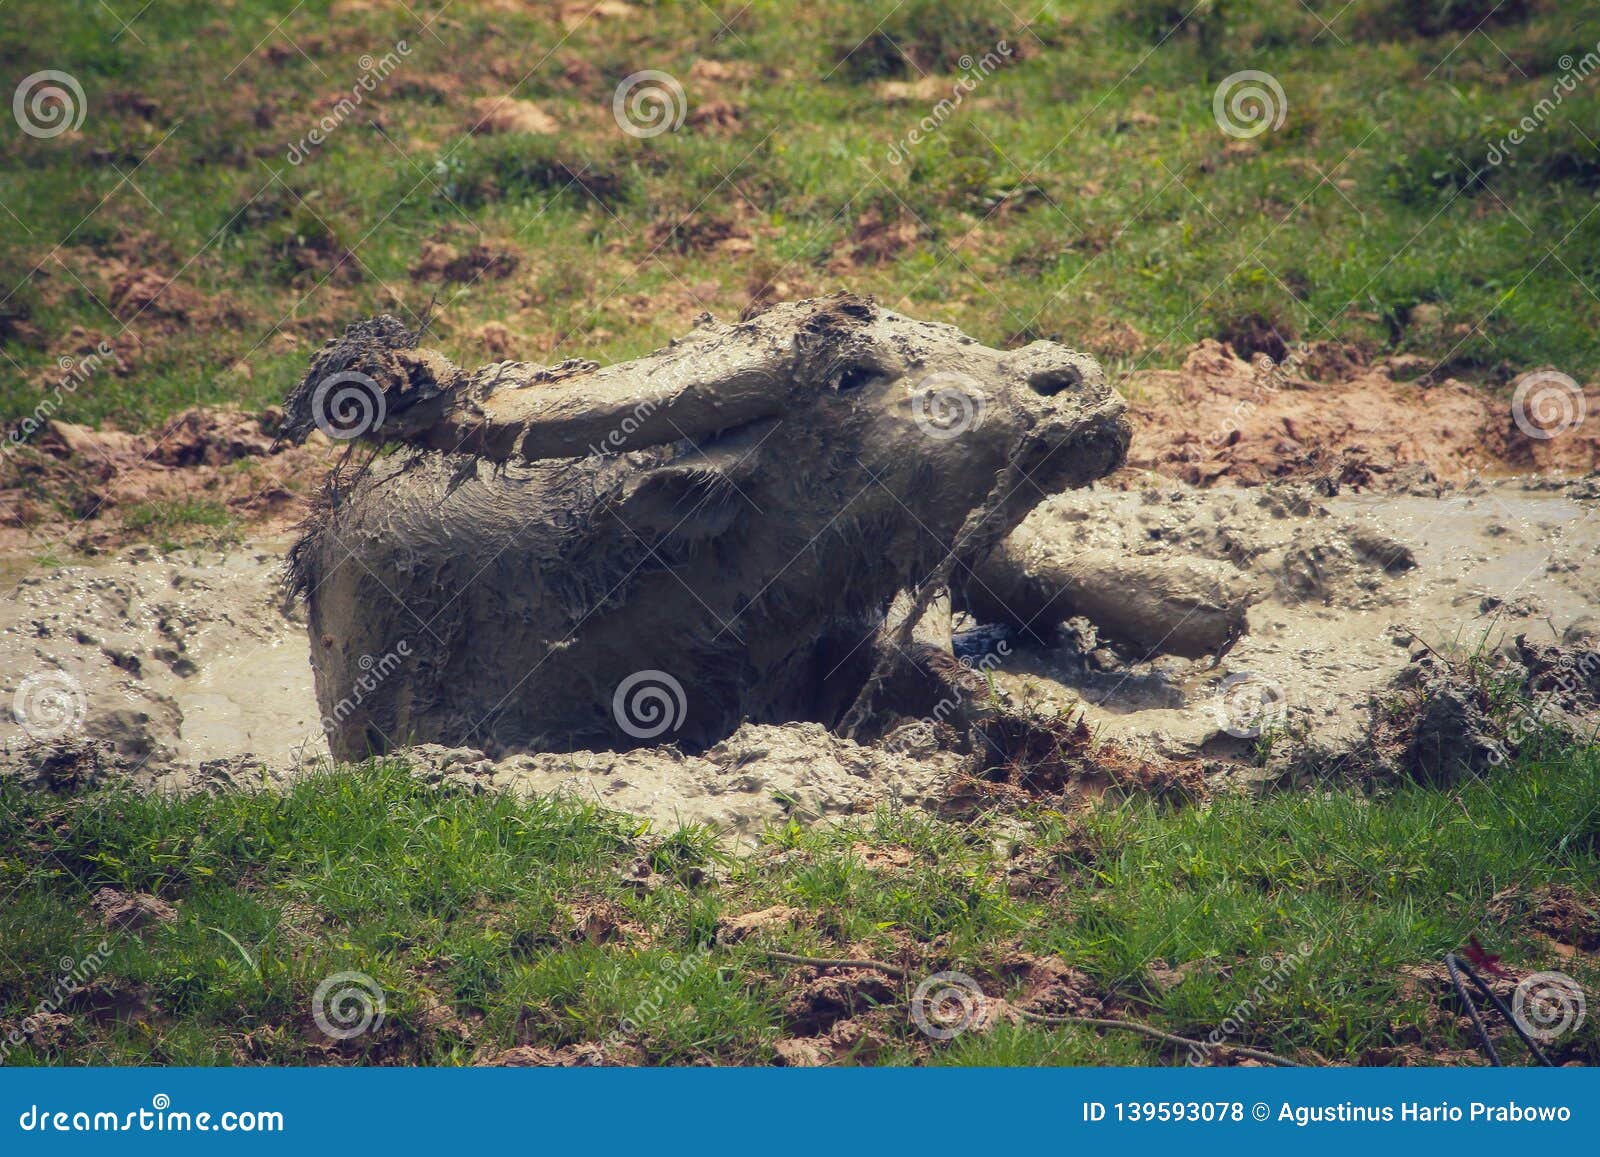 Young boy covering himself with mud stock photo - OFFSET